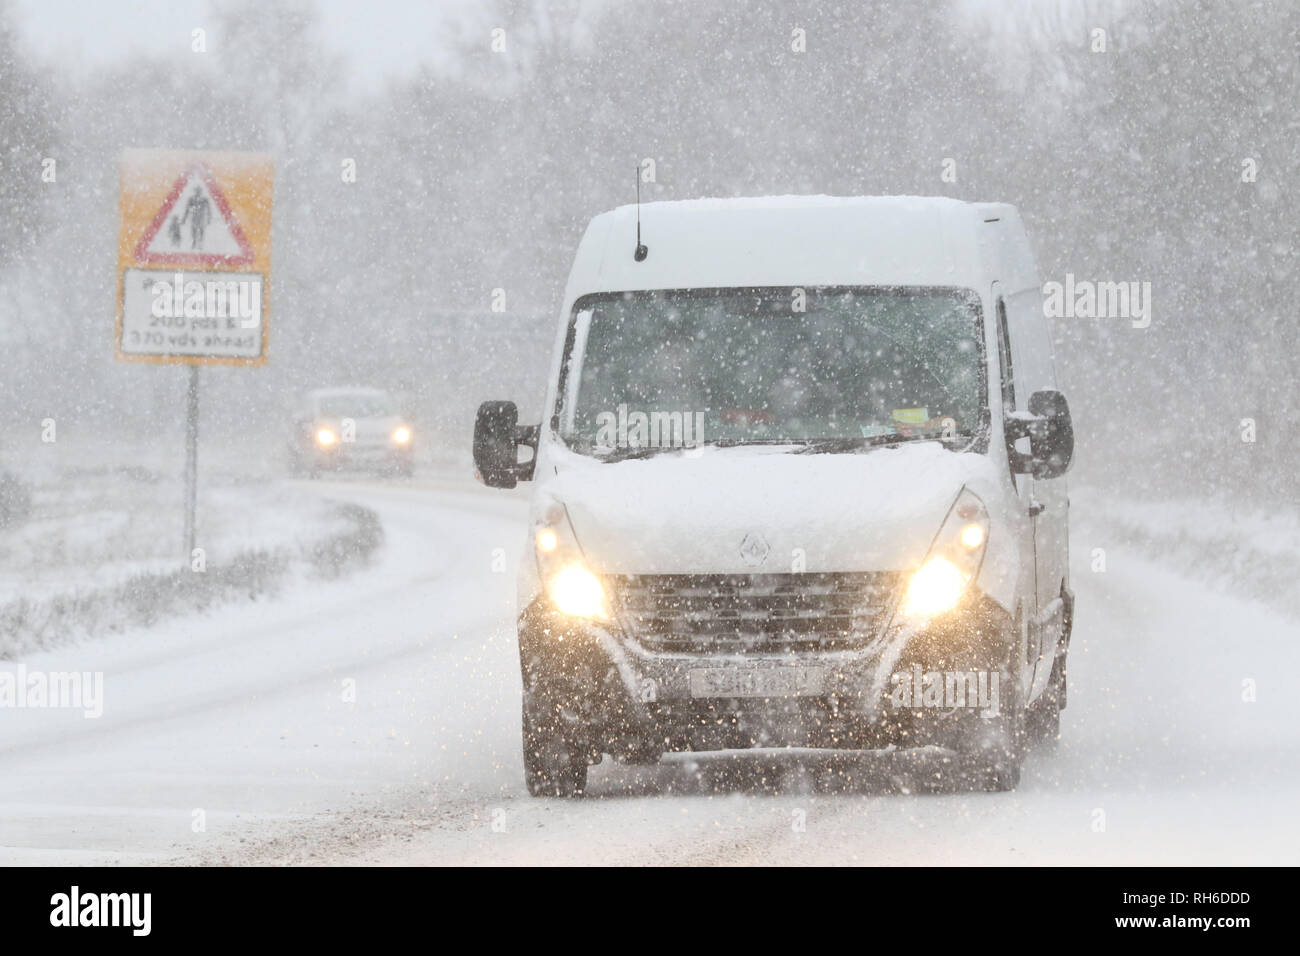 Inverness, Scotland, UK. 1 February 2019: Vehicles make their way through heavy snow at Culloden, Inverness. Picture: Andrew Smith Credit: Andrew Smith/Alamy Live News Stock Photo